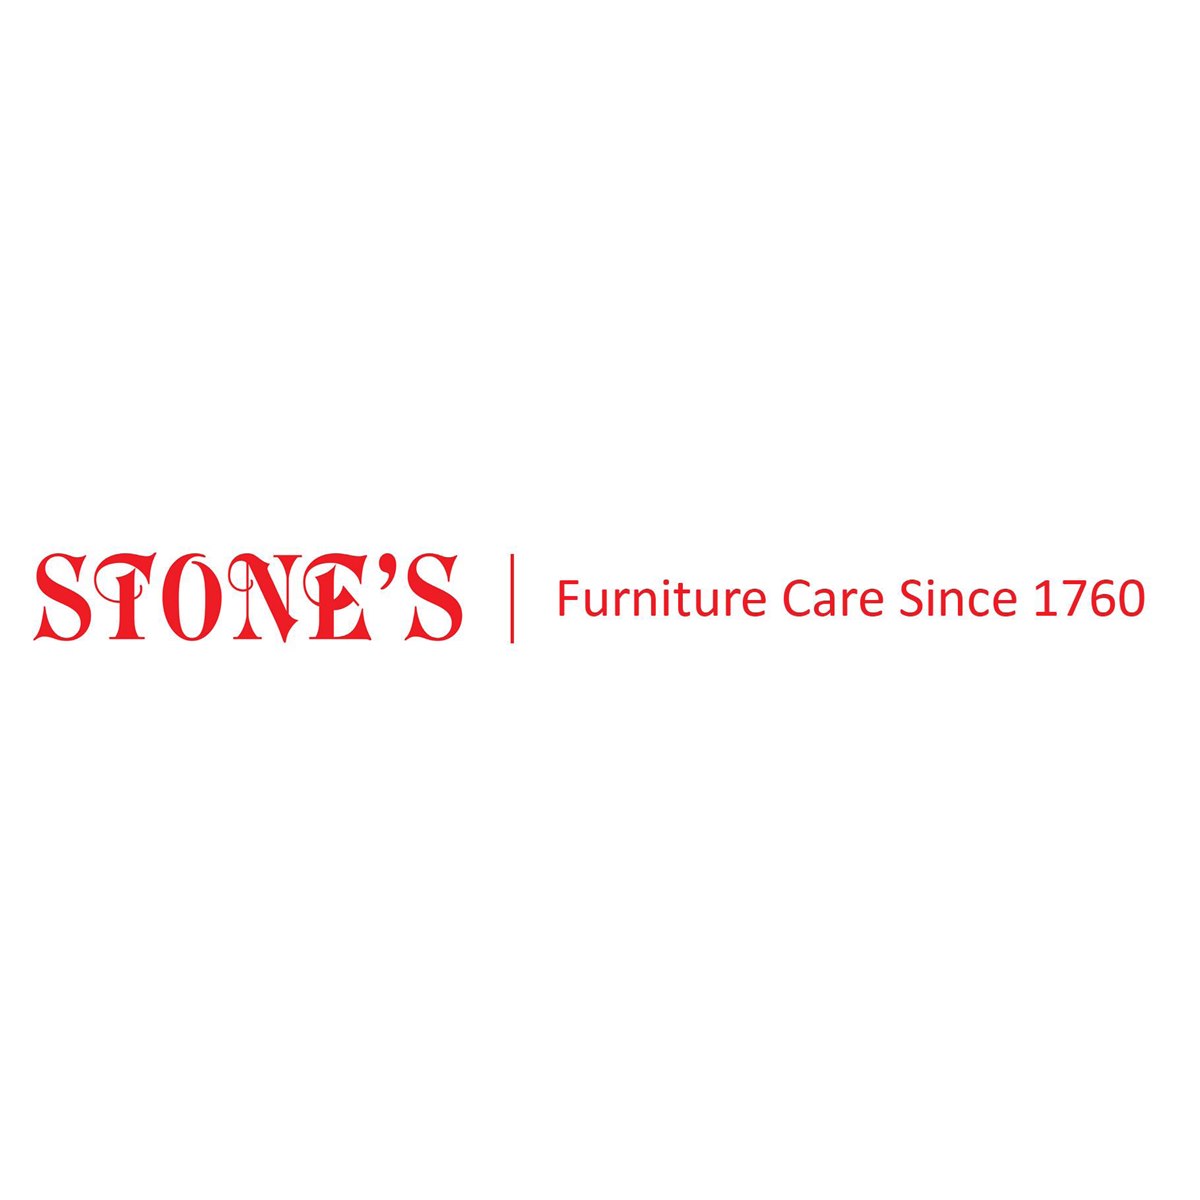 Where to Buy Stones Traditional Furniture Polish